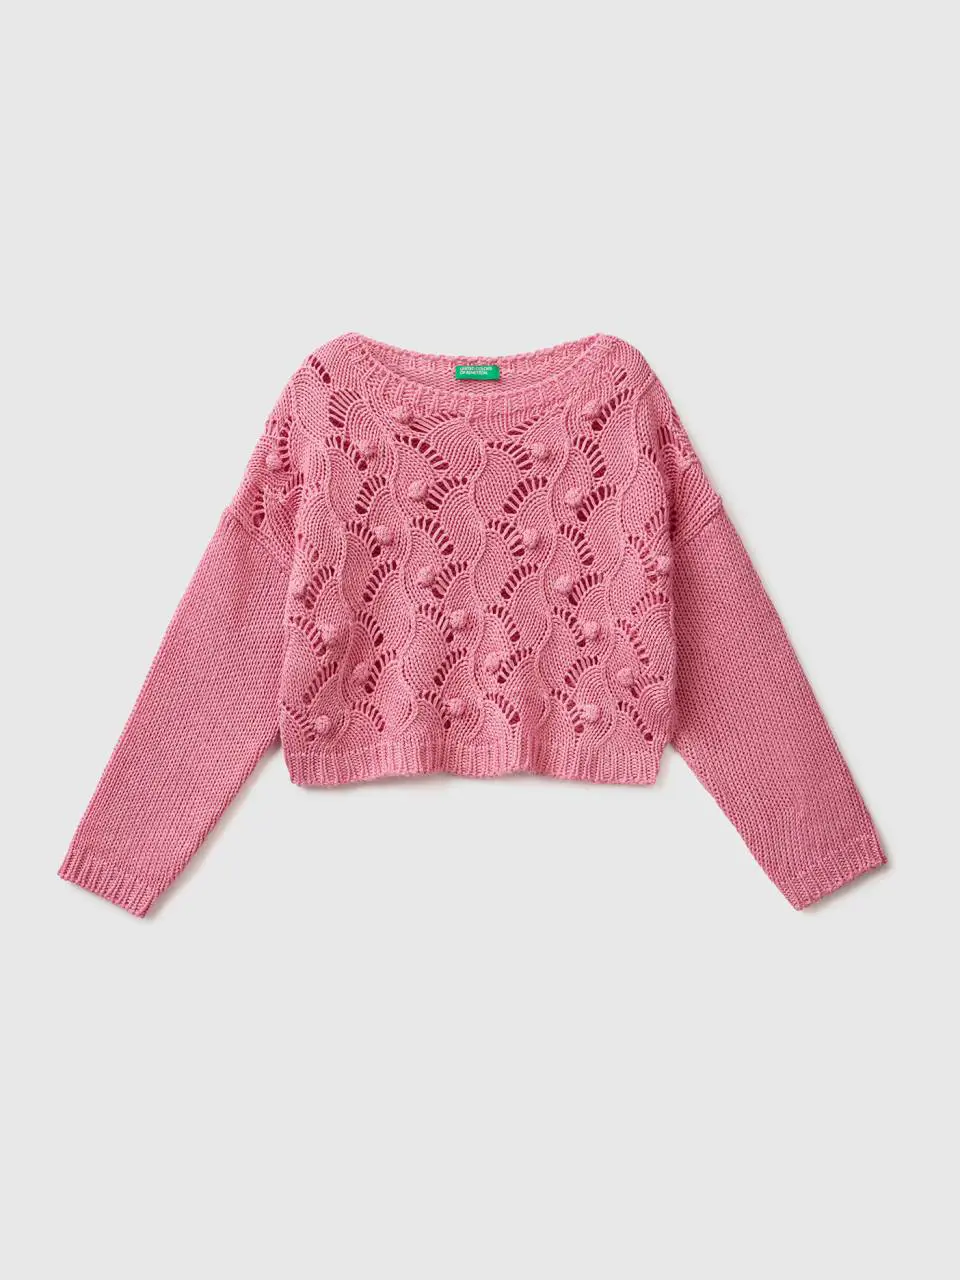 Benetton cropped sweater. 1